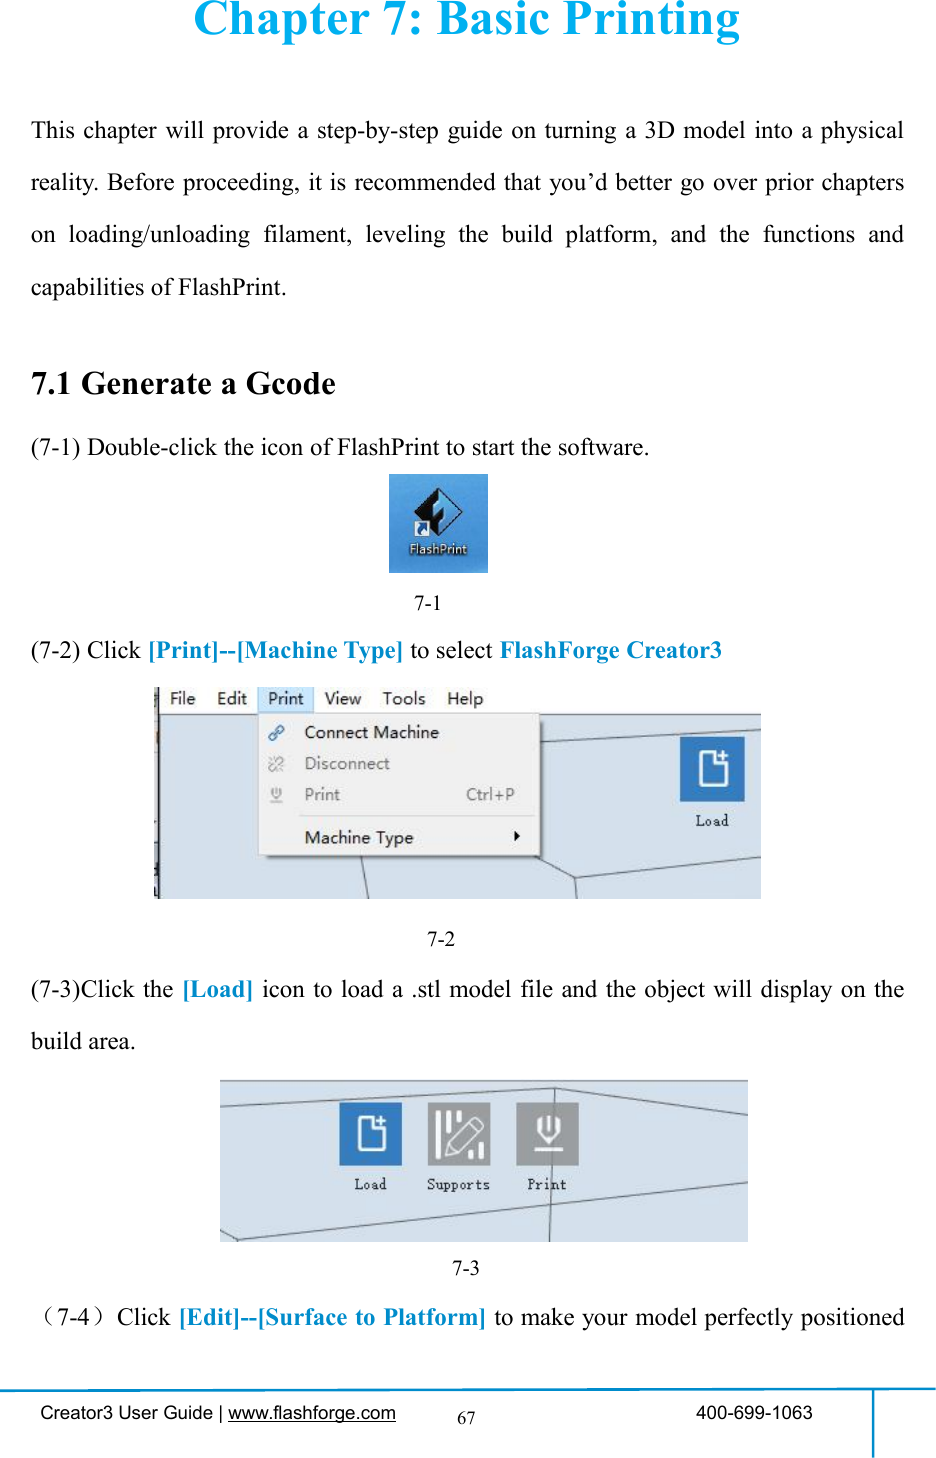 Creator3 User Guide | www.flashforge.com 400-699-106367Chapter 7: Basic PrintingThis chapter will provide a step-by-step guide on turning a 3D model into a physicalreality. Before proceeding, it is recommended that you’d better go over prior chapterson loading/unloading filament, leveling the build platform, and the functions andcapabilities of FlashPrint.7.1 Generate a Gcode(7-1) Double-click the icon of FlashPrint to start the software.7-1(7-2) Click [Print]--[Machine Type] to select FlashForge Creator37-2(7-3)Click the [Load] icon to load a .stl model file and the object will display on thebuild area.7-3（7-4）Click [Edit]--[Surface to Platform] to make your model perfectly positioned34